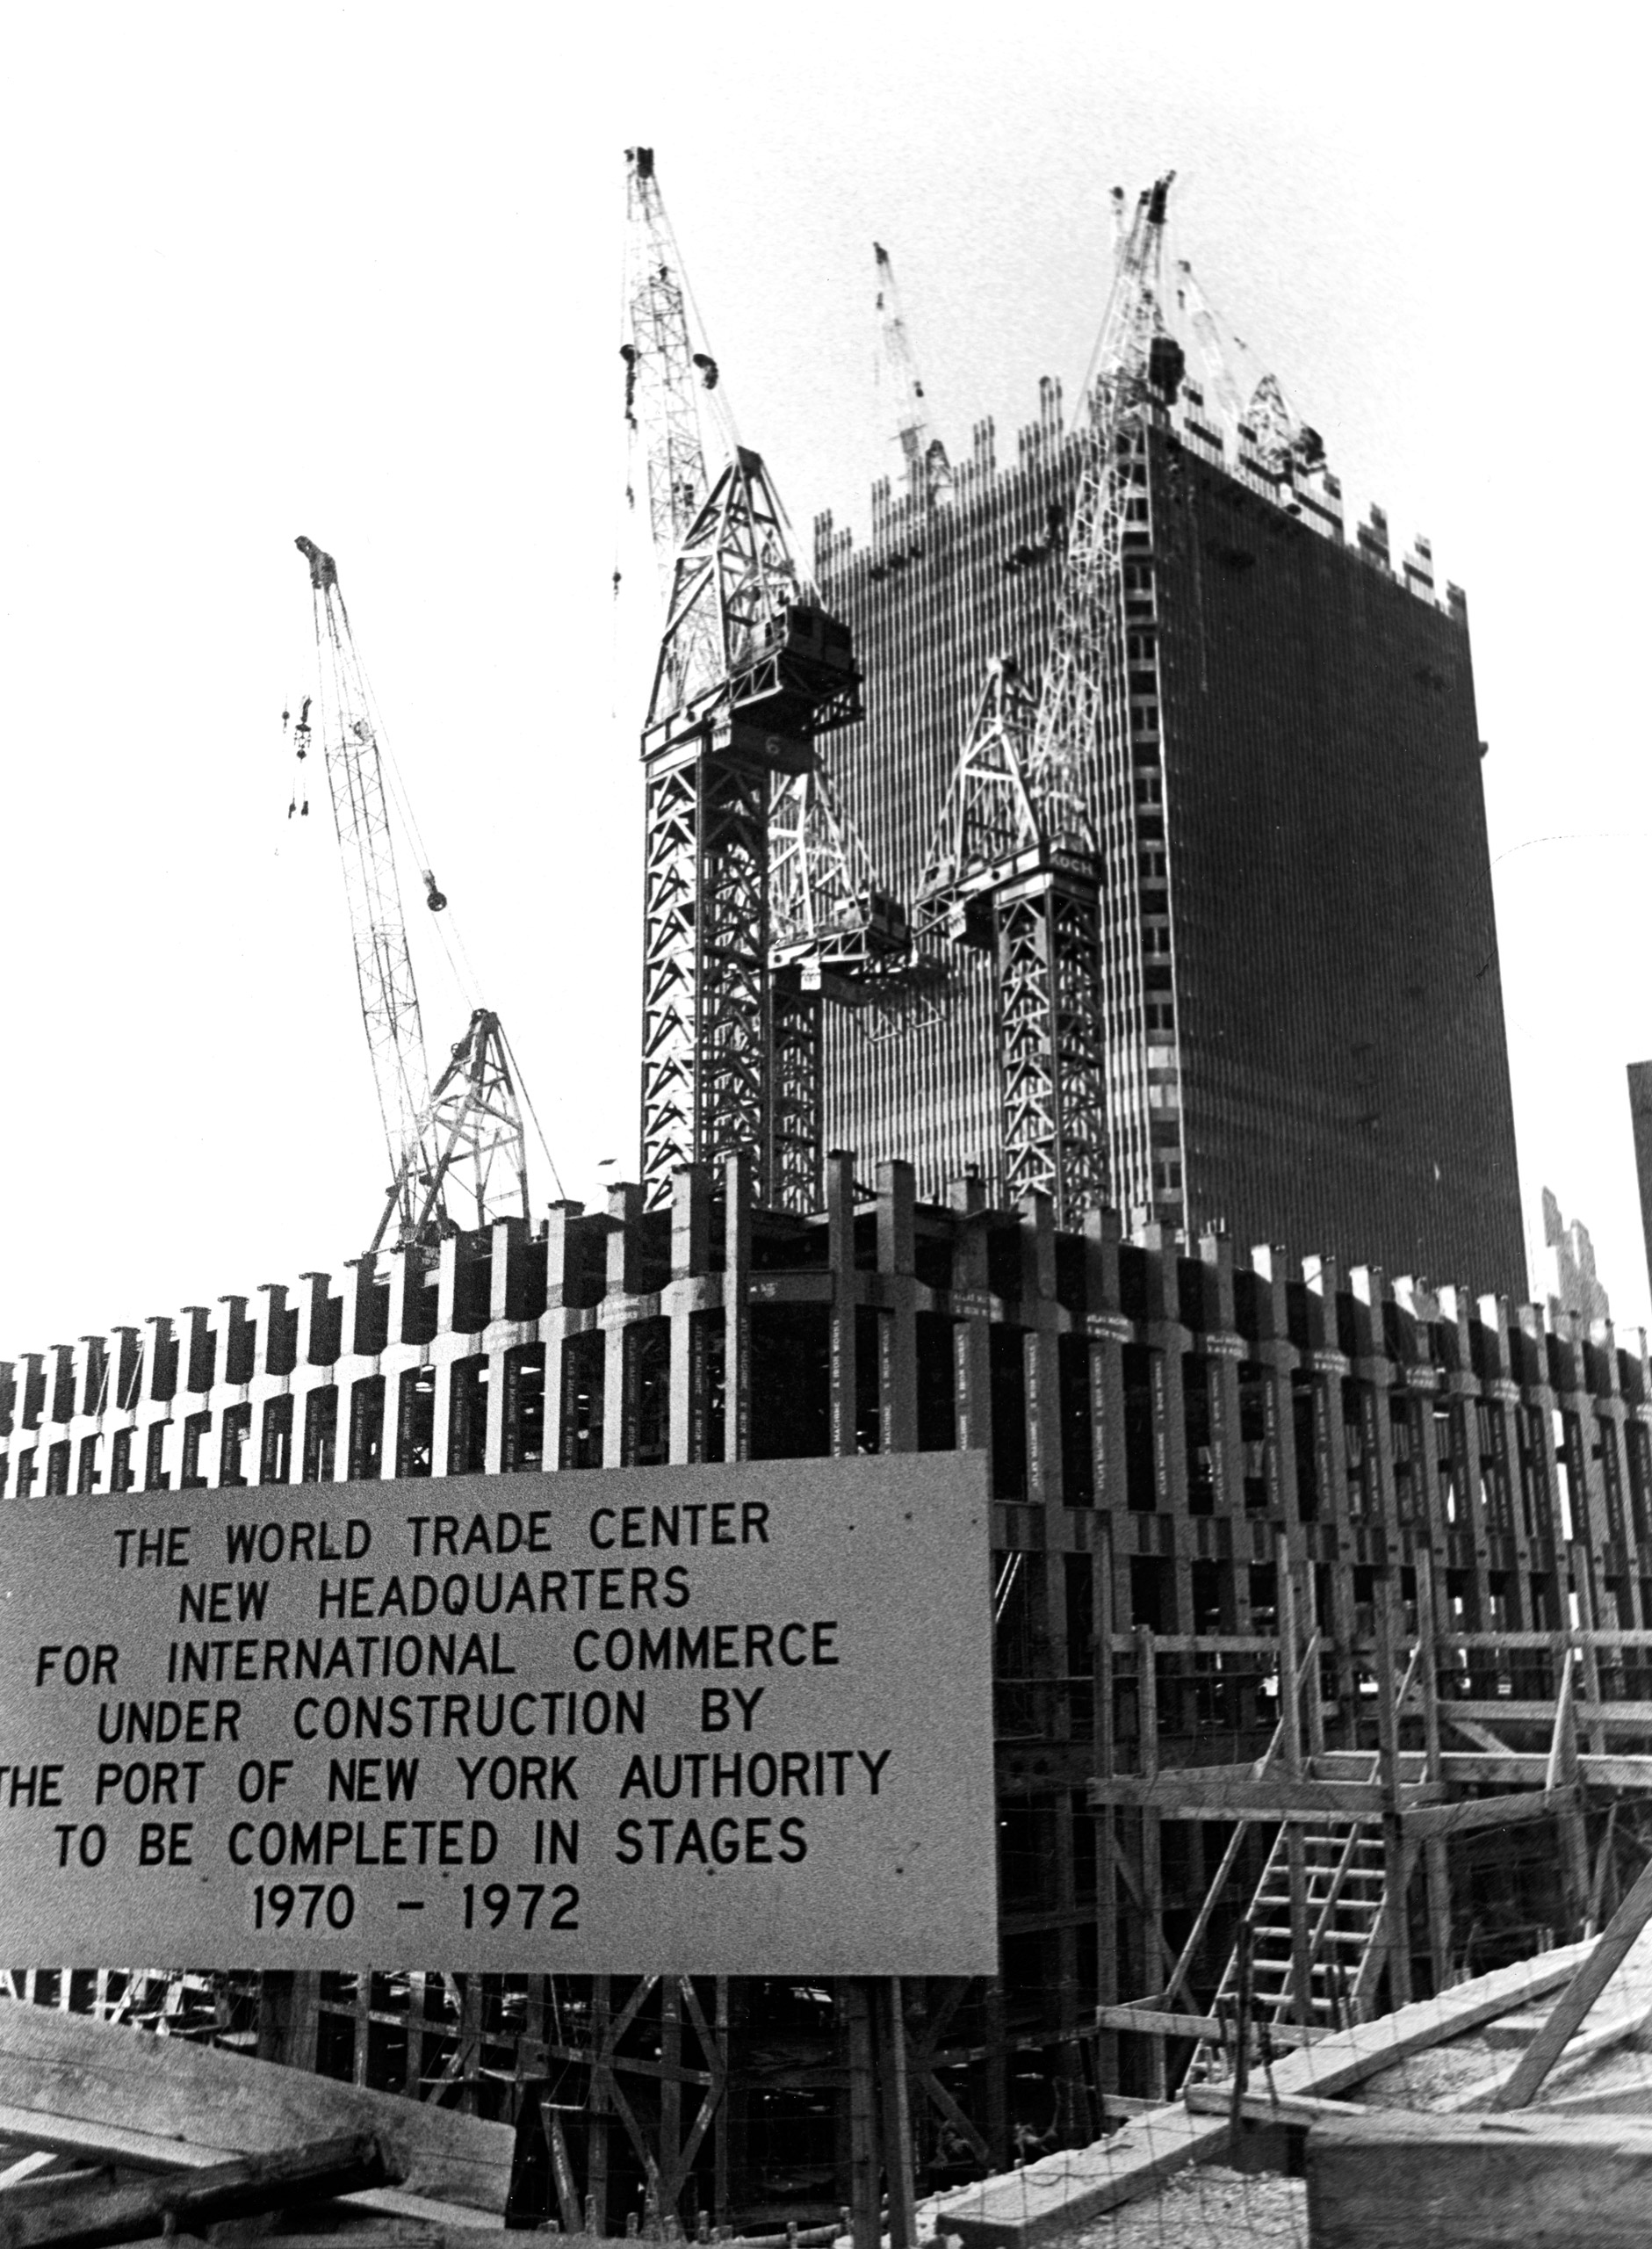 View of the World Trade Center under construction, with a sign announcing the completion schedule, circa 1969, New York City,